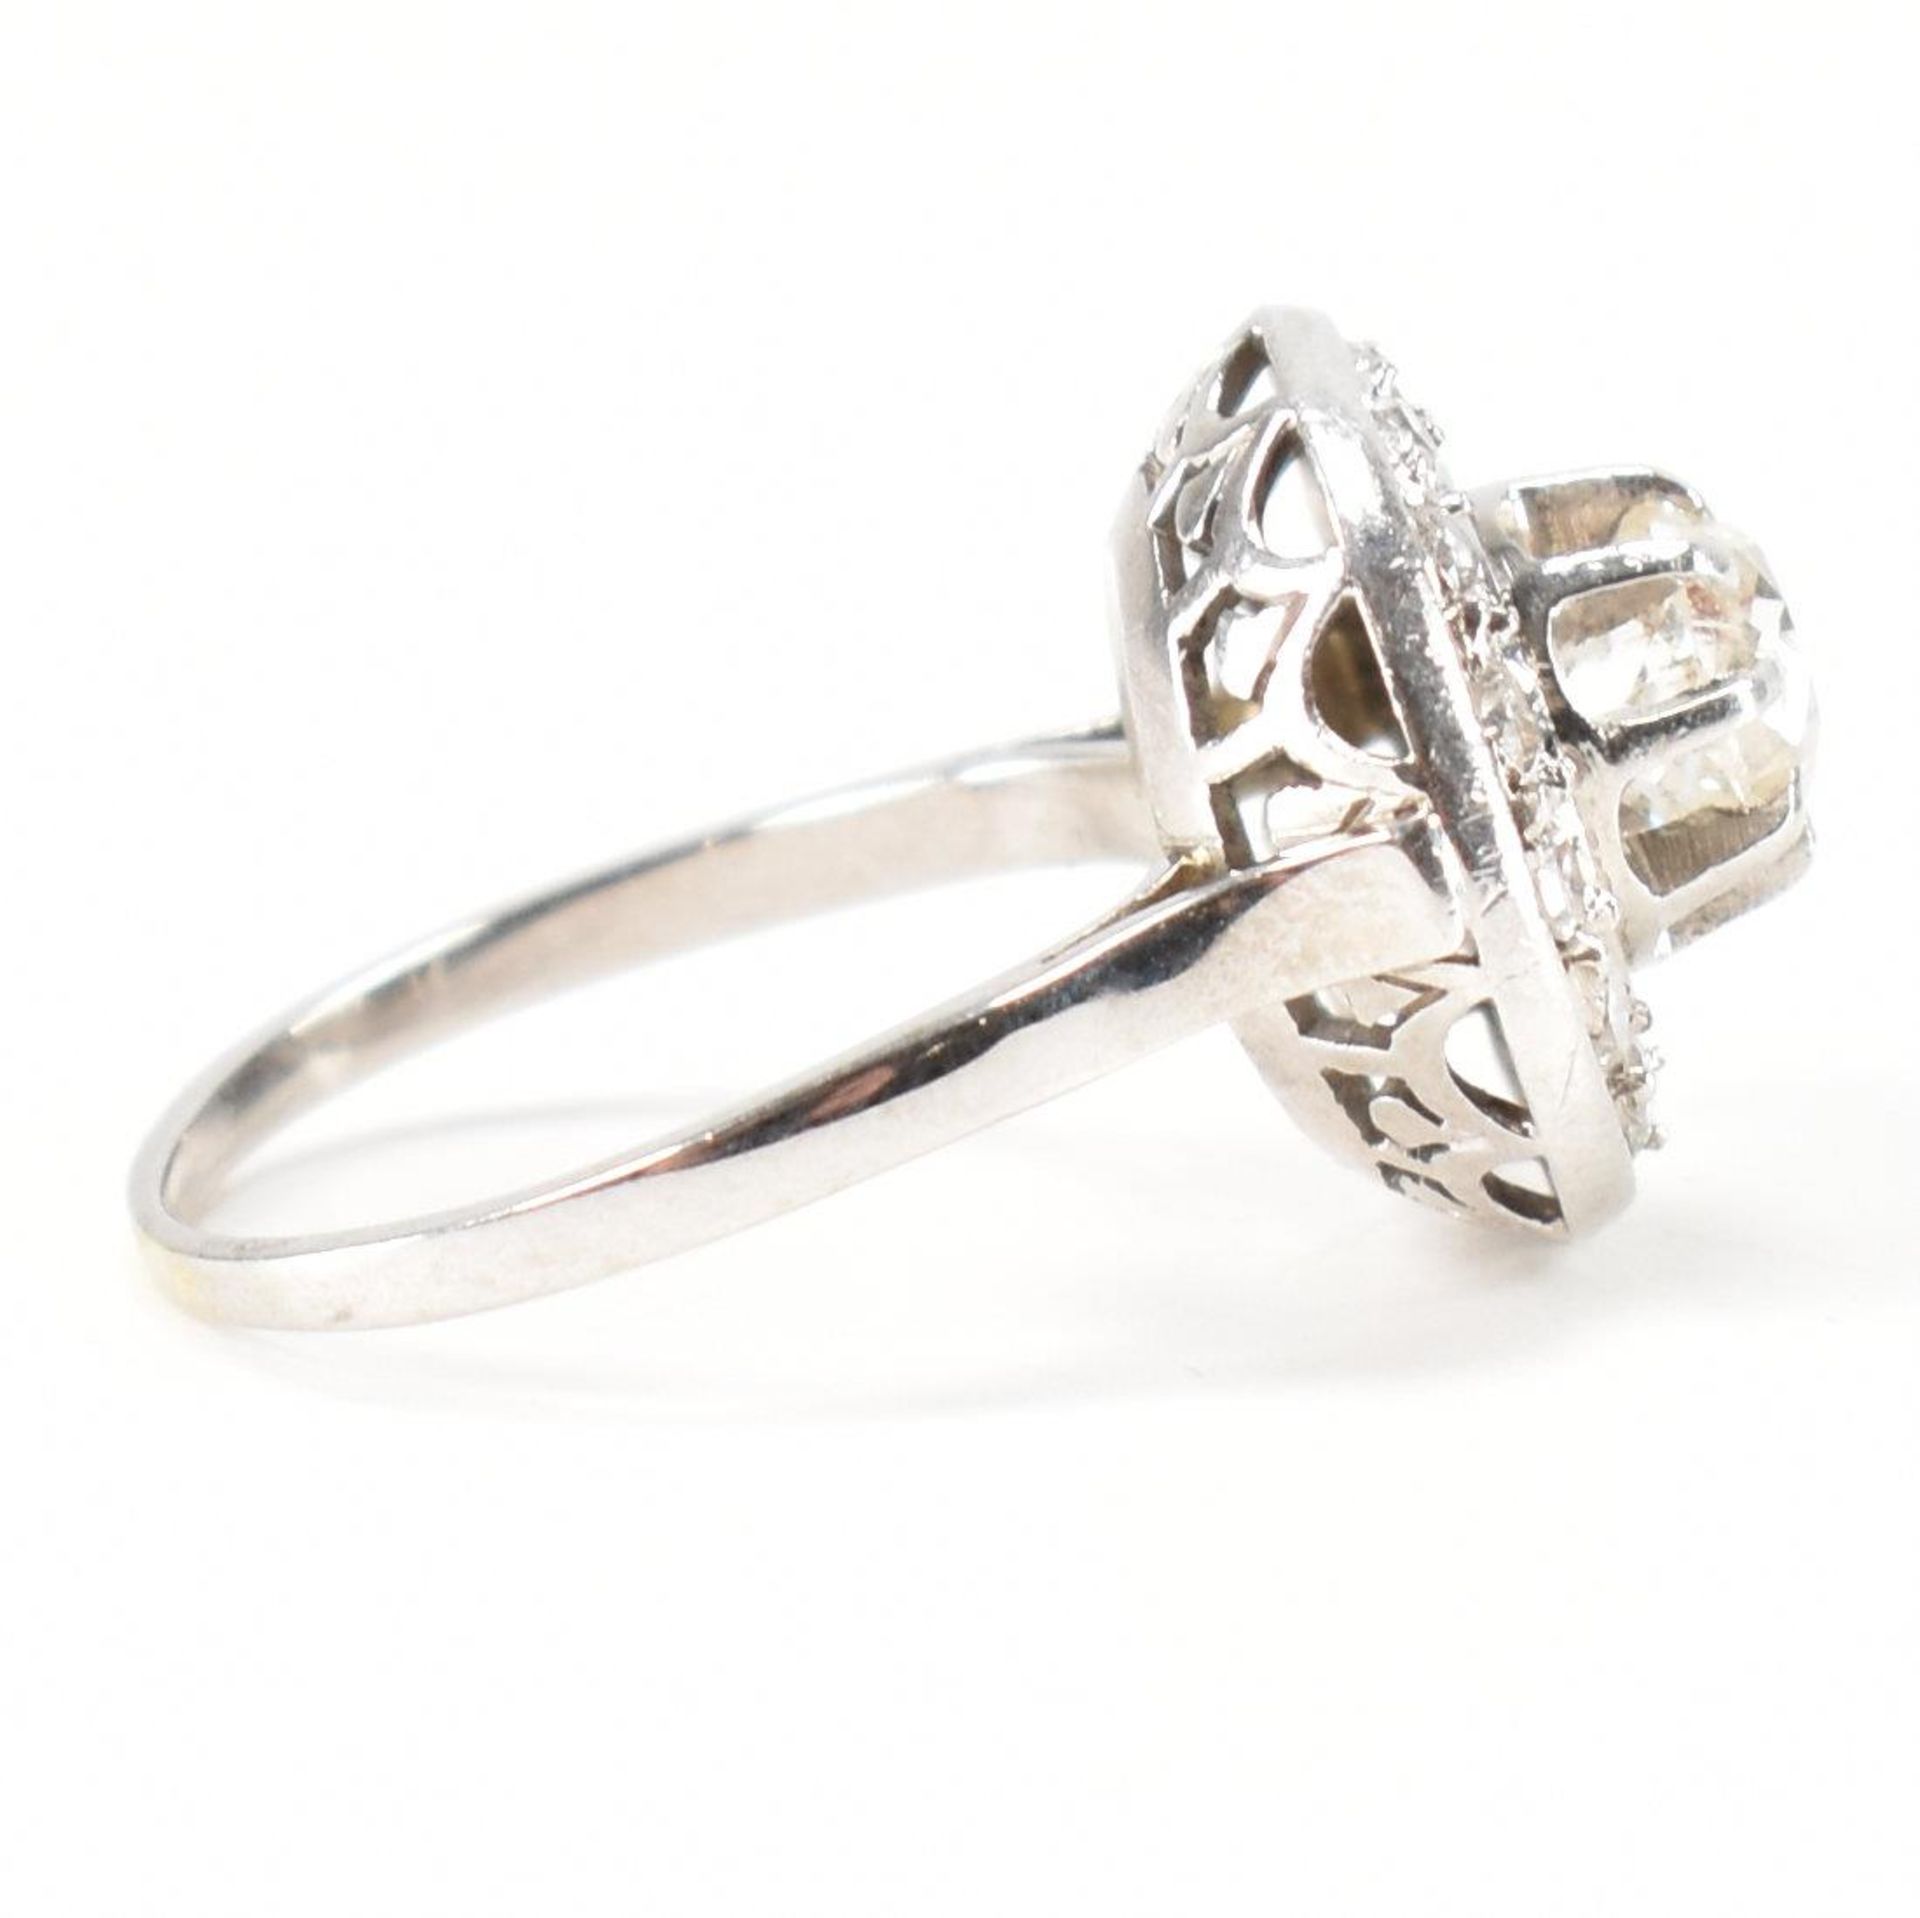 FRENCH ART DECO DIAMOND TARGET RING - Image 5 of 8